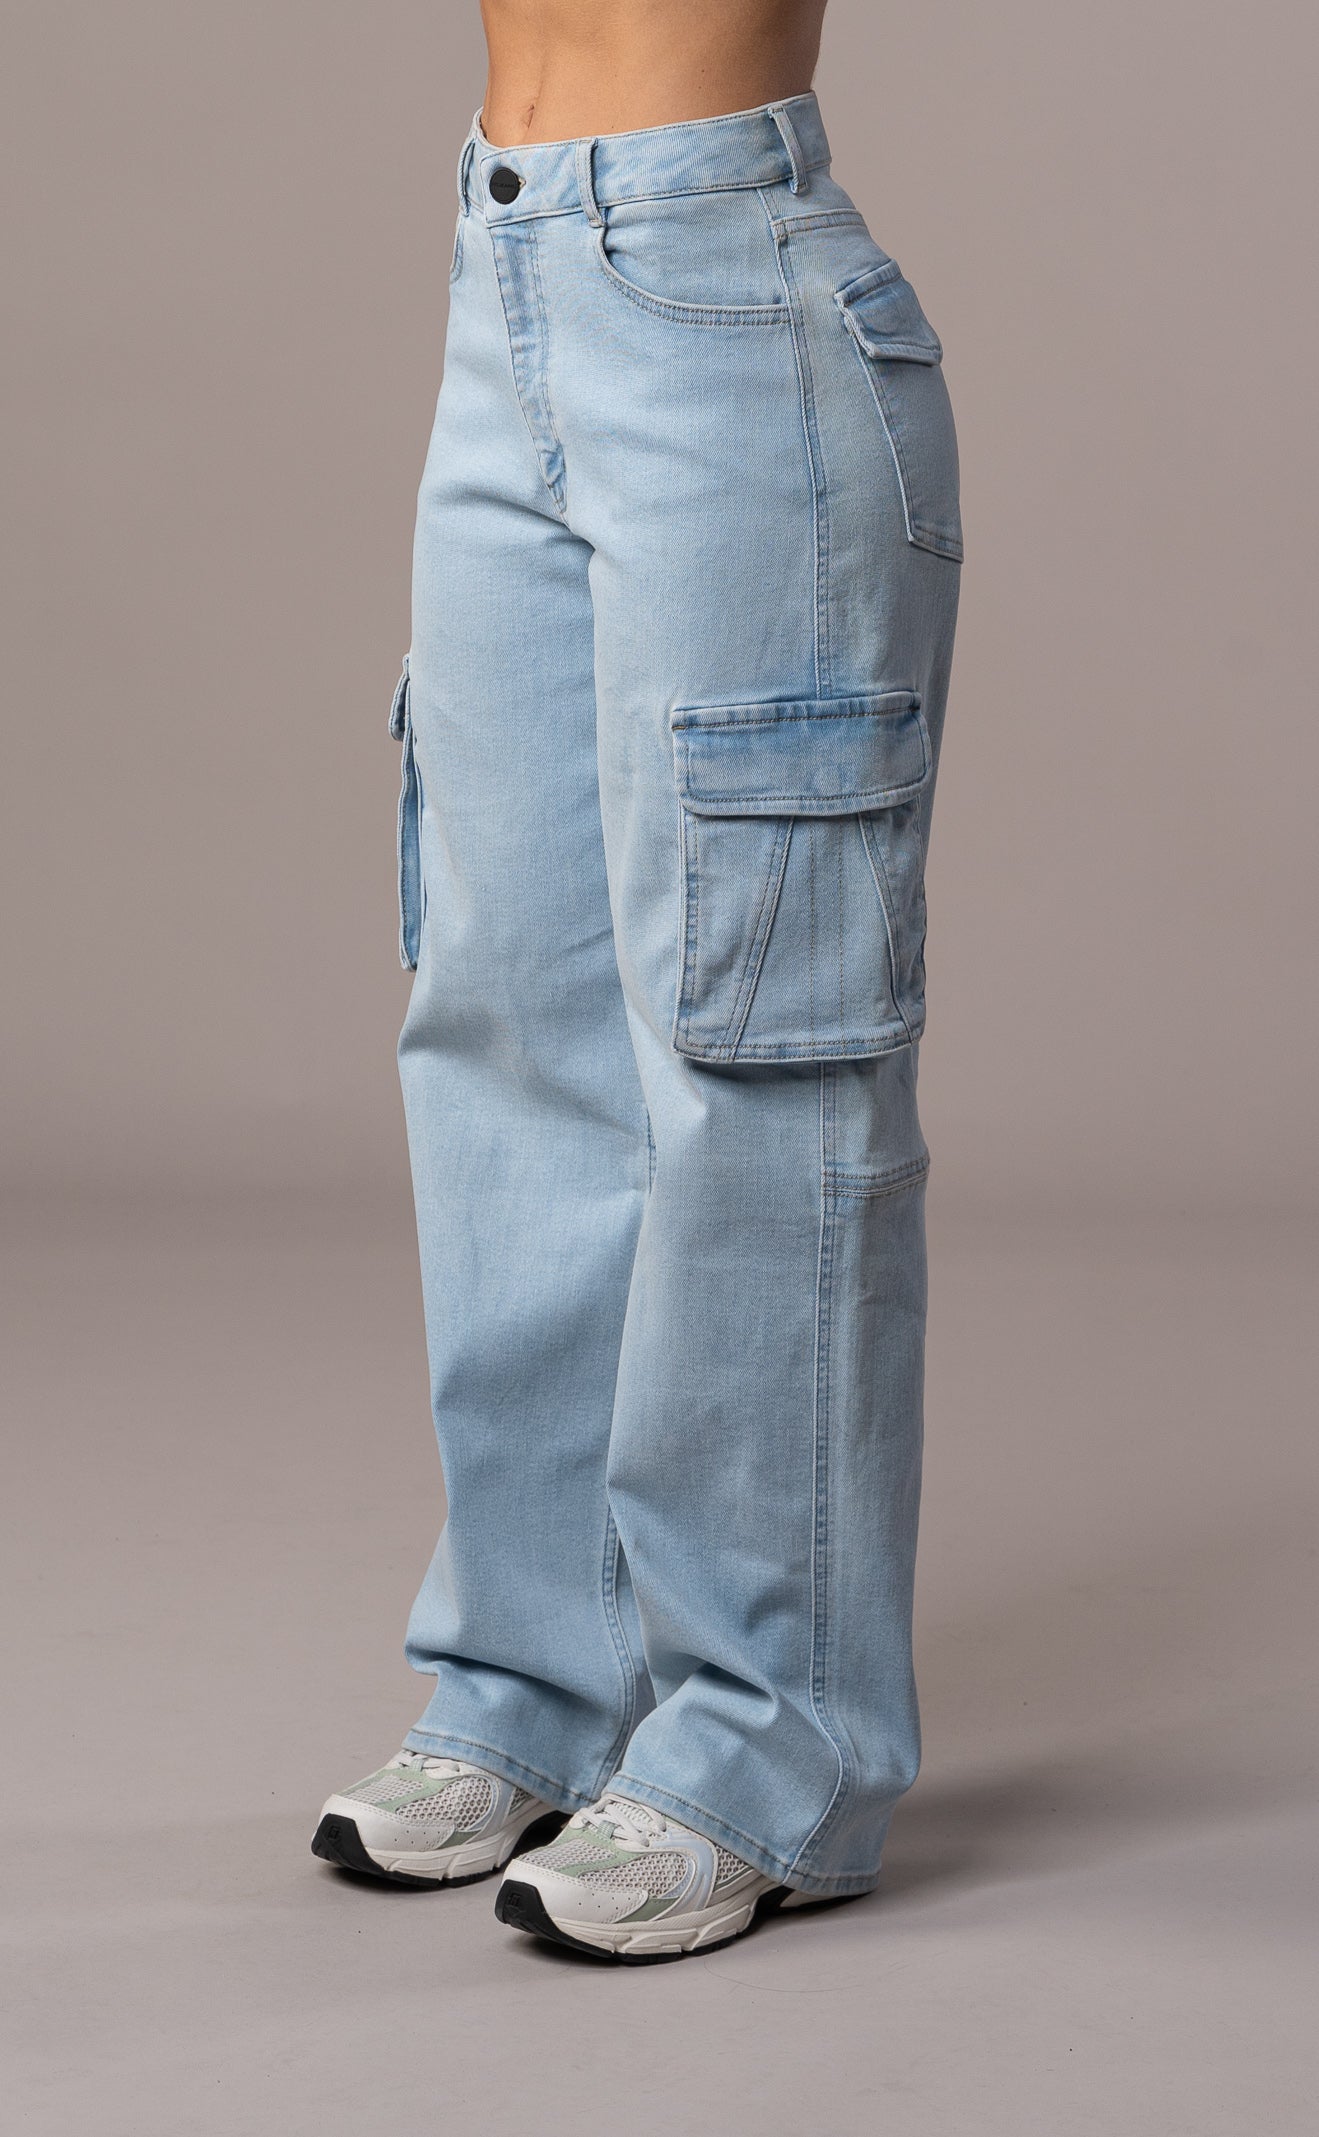 Womens Cargo Fitjeans - Vintage Blue Cargo FITJEANS   